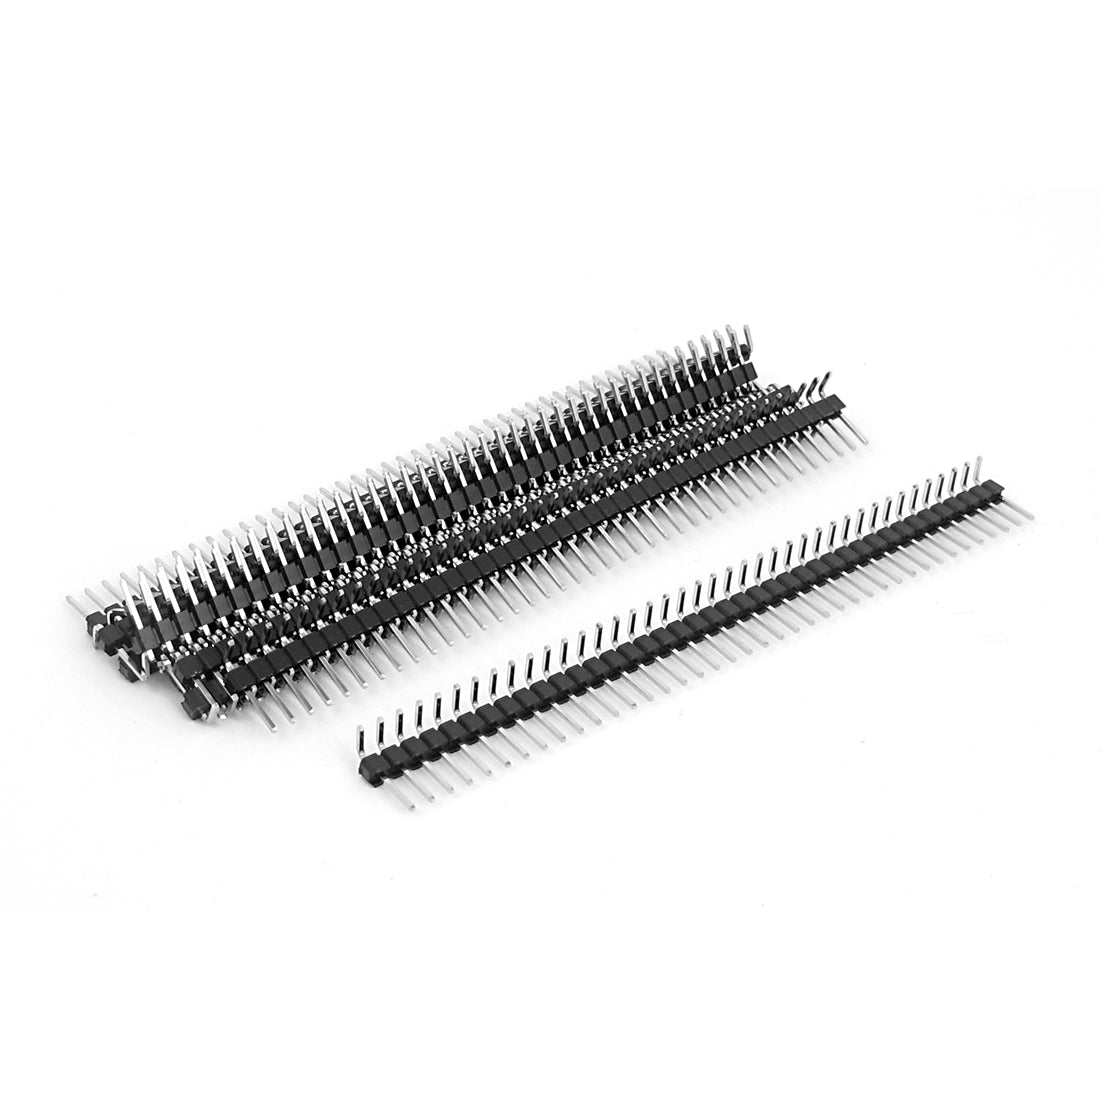 uxcell Uxcell 10pcs Right Angle 40-pin 2.54mm Male Header for Breadboard 1x40 Single Row